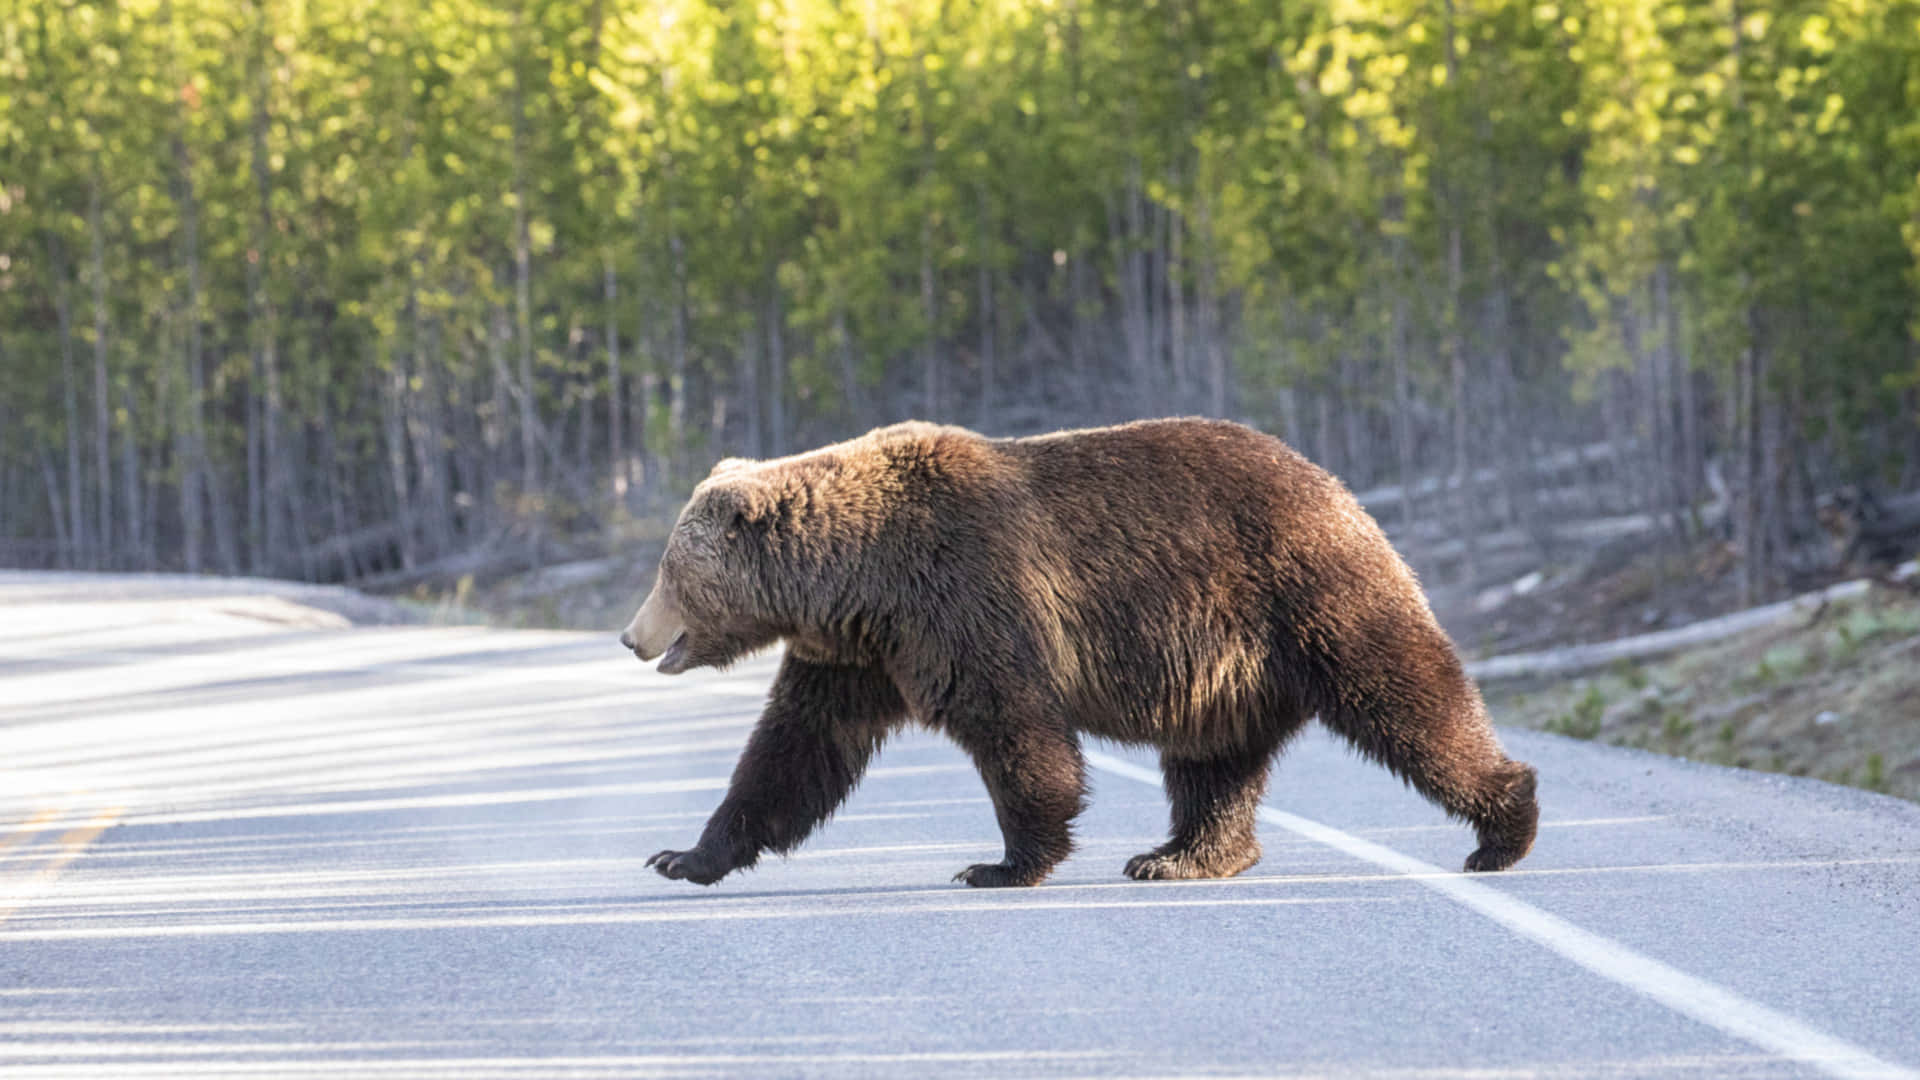 A Brown Bear Crossing The Road In The Middle Of A Forest